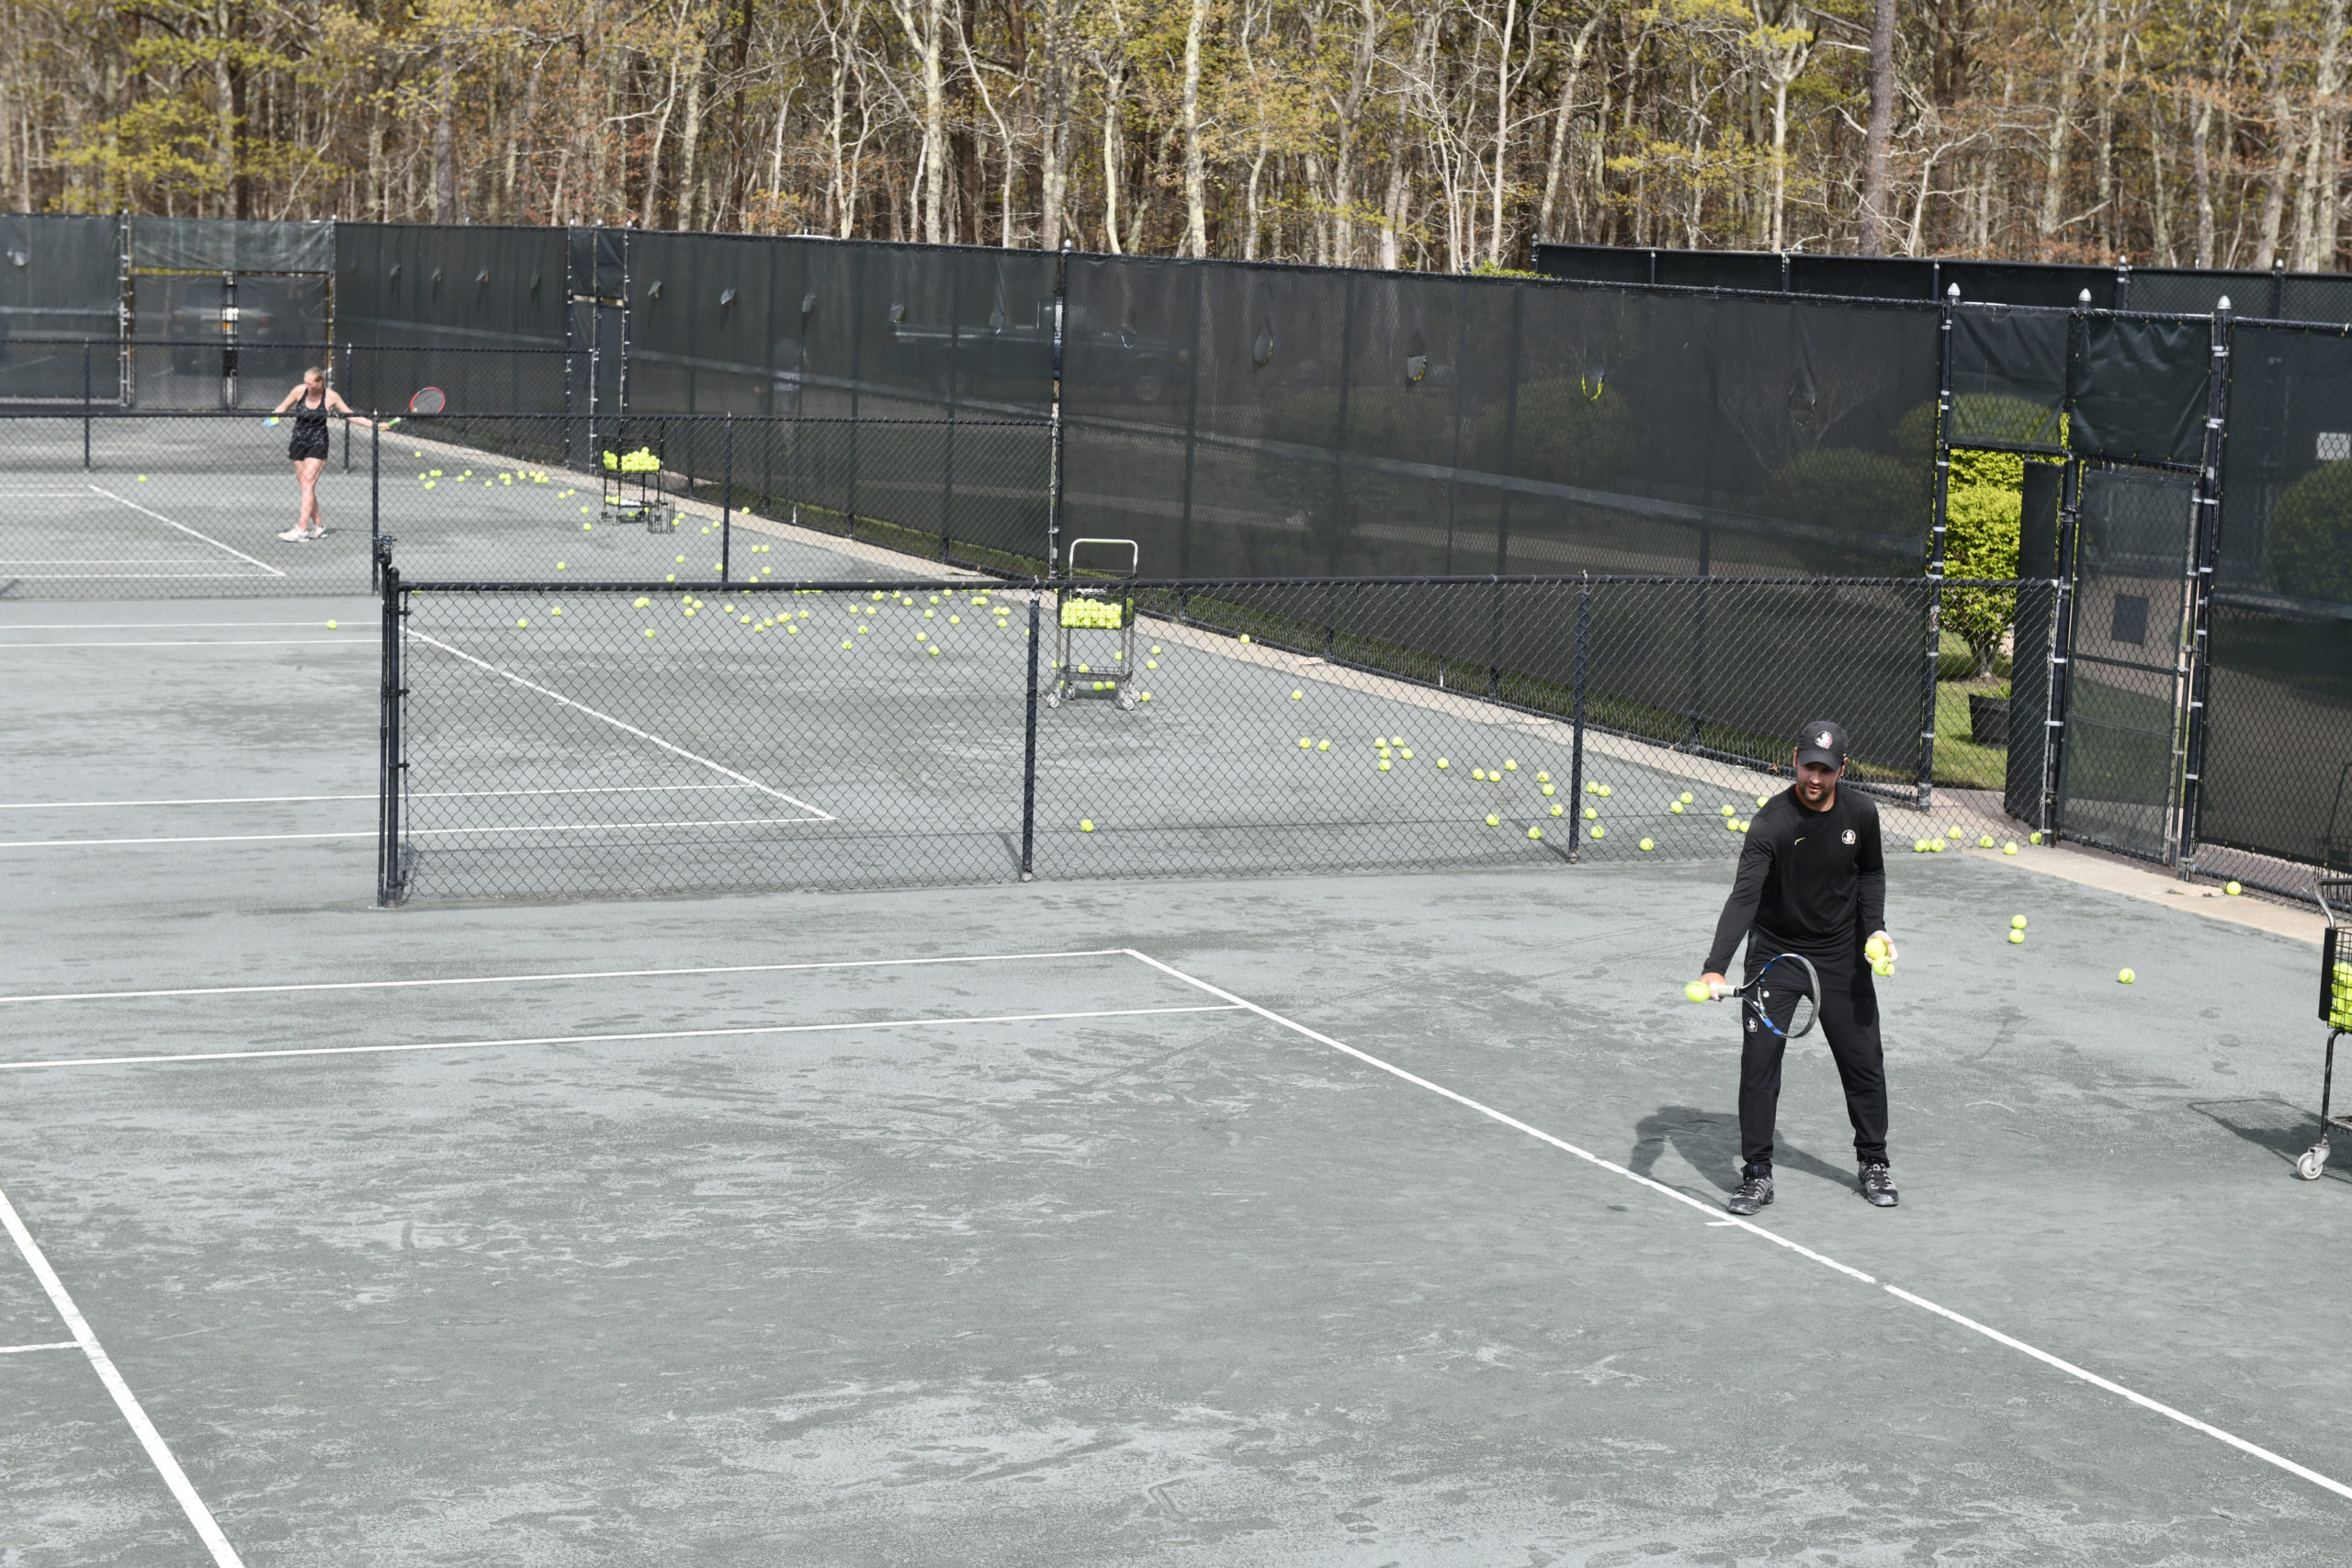 Tennis instuctor Matej Zlatkovic works with a student at East Hampton Indoor Tennis on Saturday morning.  DANA SHAW